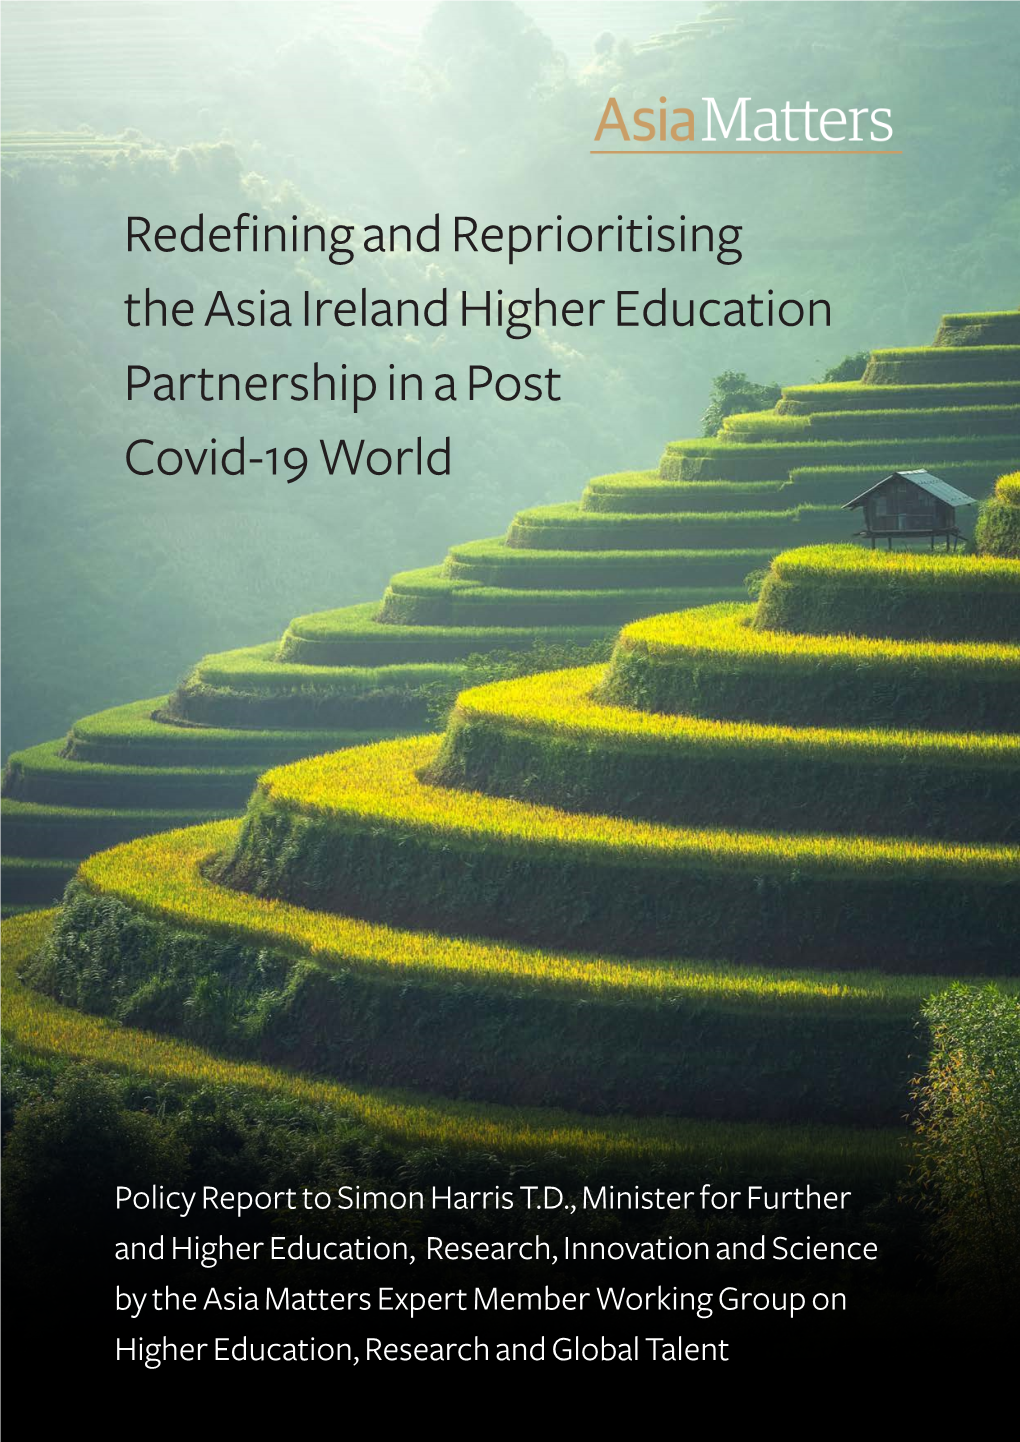 Redefining and Reprioritising the Asia Ireland Higher Education Partnership in a Post Covid-19 World